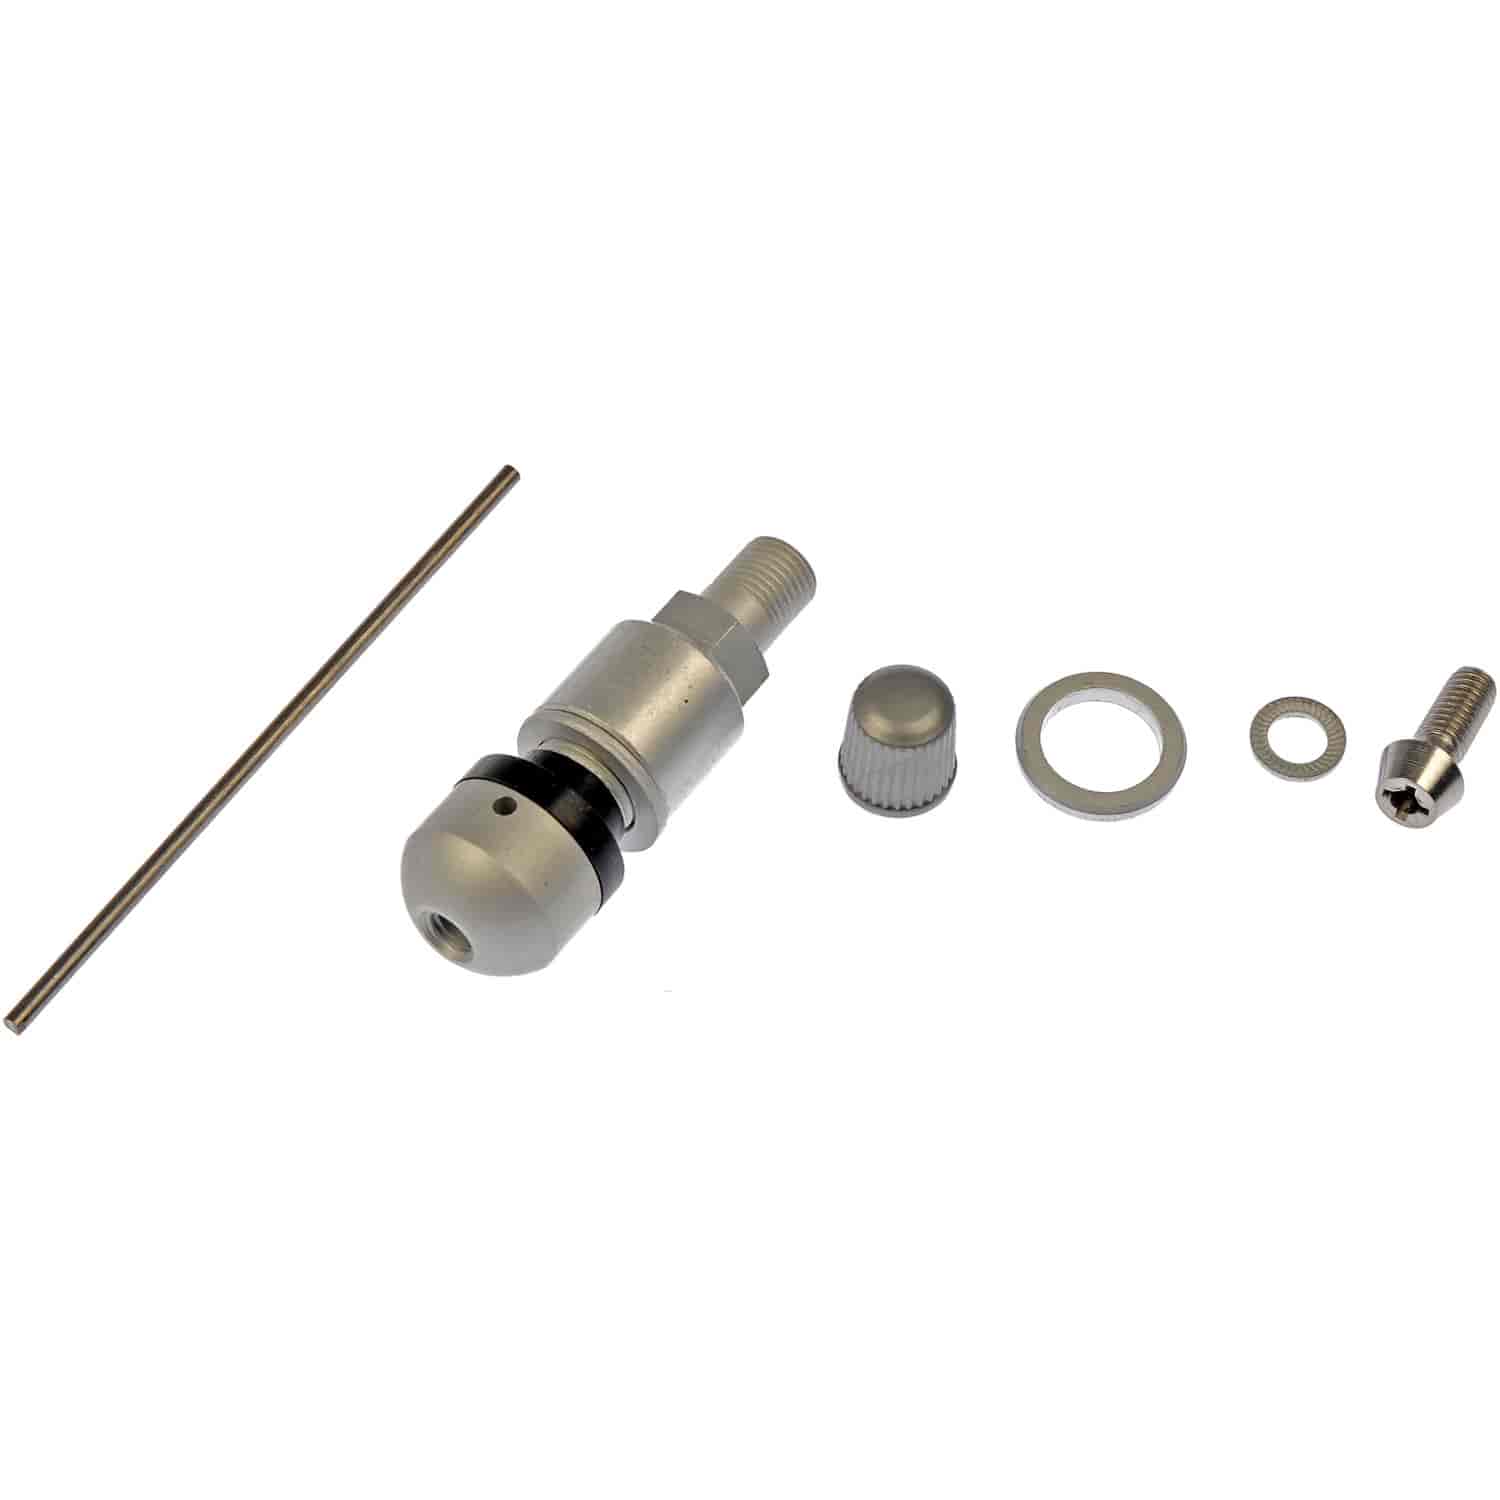 TPMS Service Kit - Replacement Aluminum Clamp-In Valve Stem with Mounting Screw